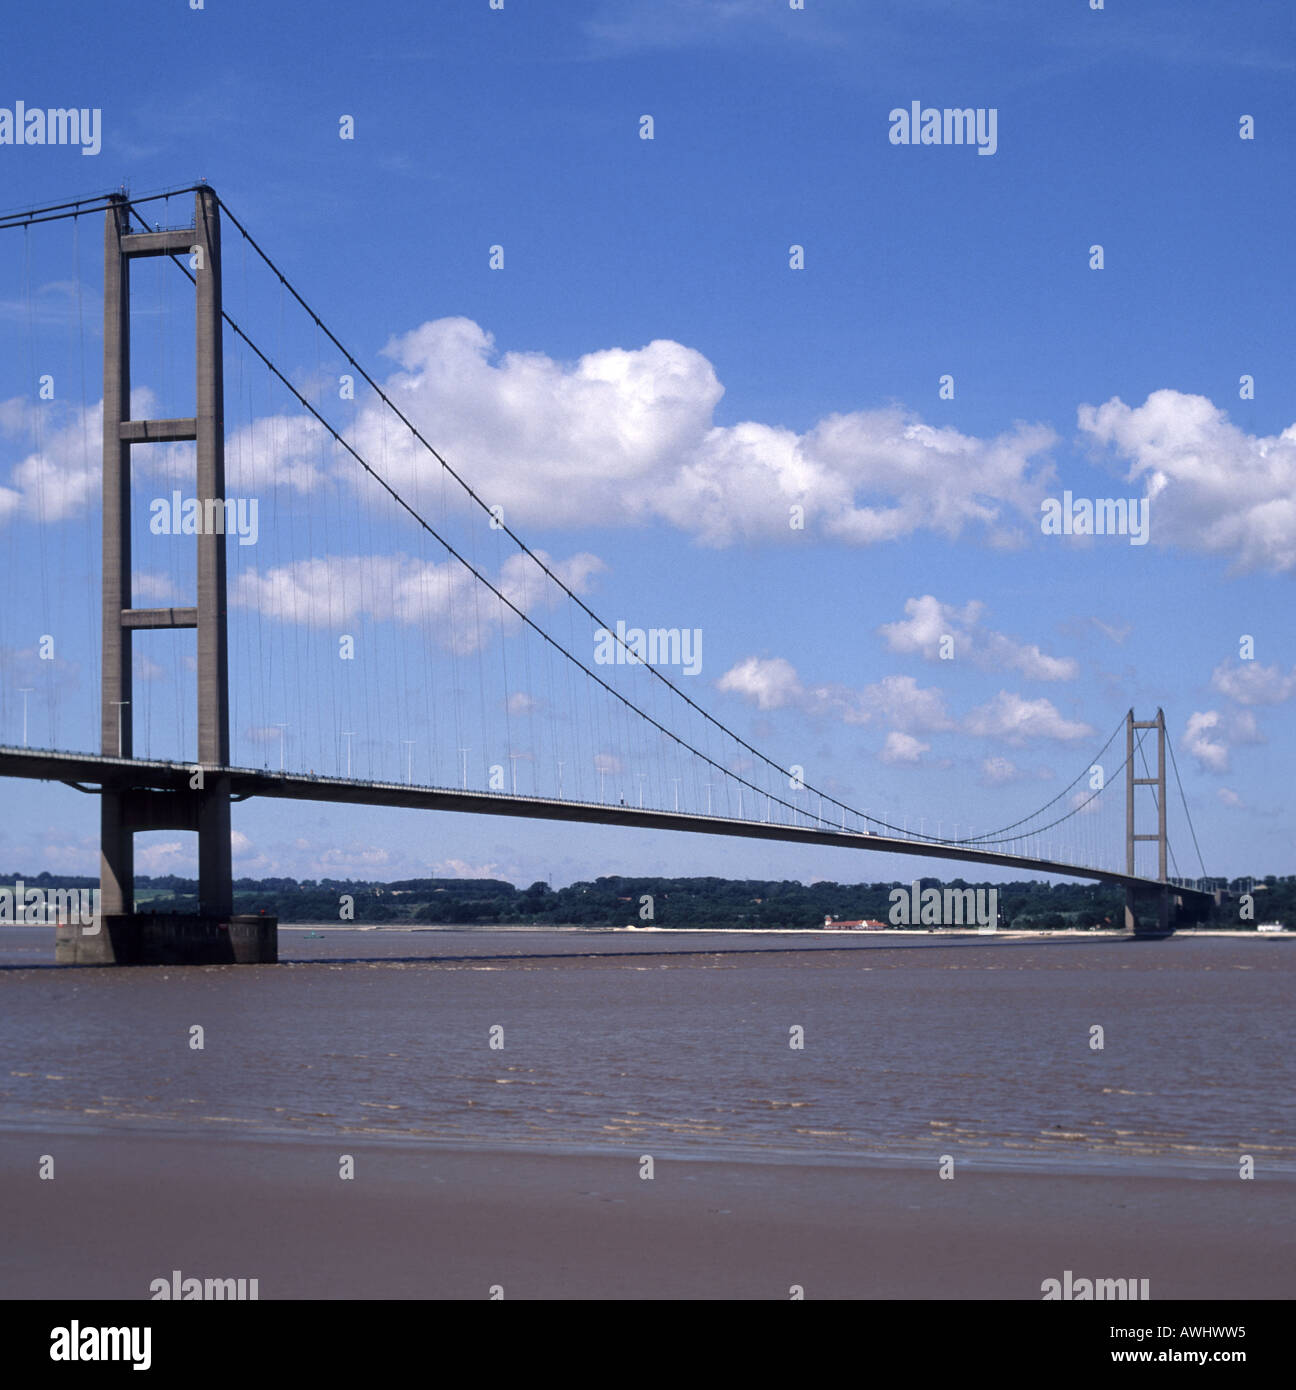 Landmark A15 road Humber suspension bridge spans humber estuary from Barton upon Humber Lincolnshire towards Hessle Hull East Riding of Yorkshire Stock Photo